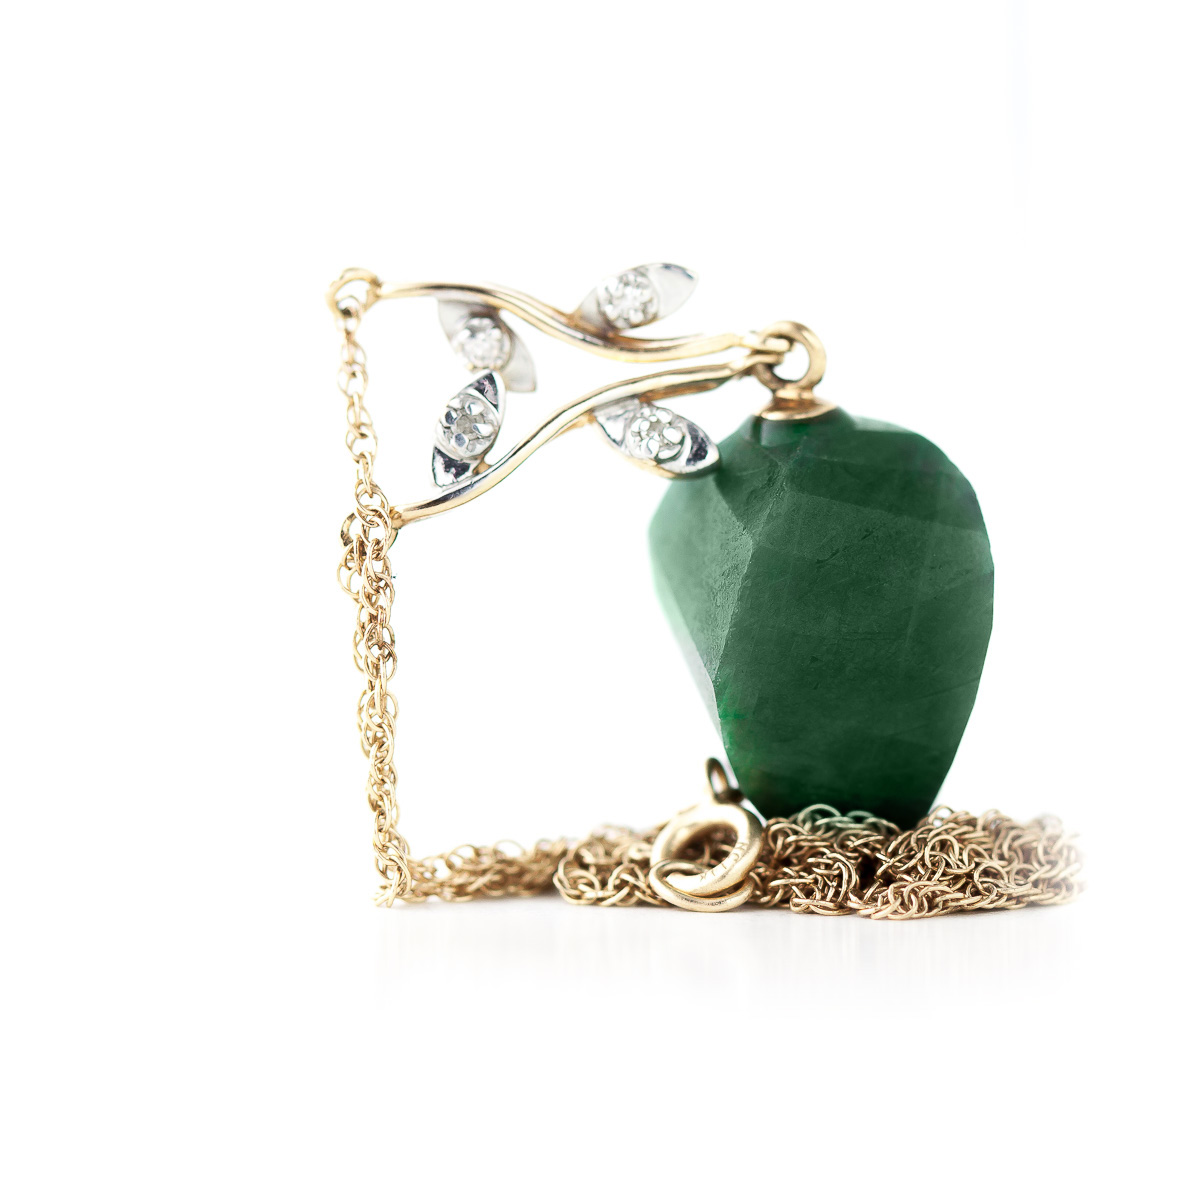 Twisted Briolette Cut Emerald Pendant Necklace 15.27 ctw in 9ct Gold